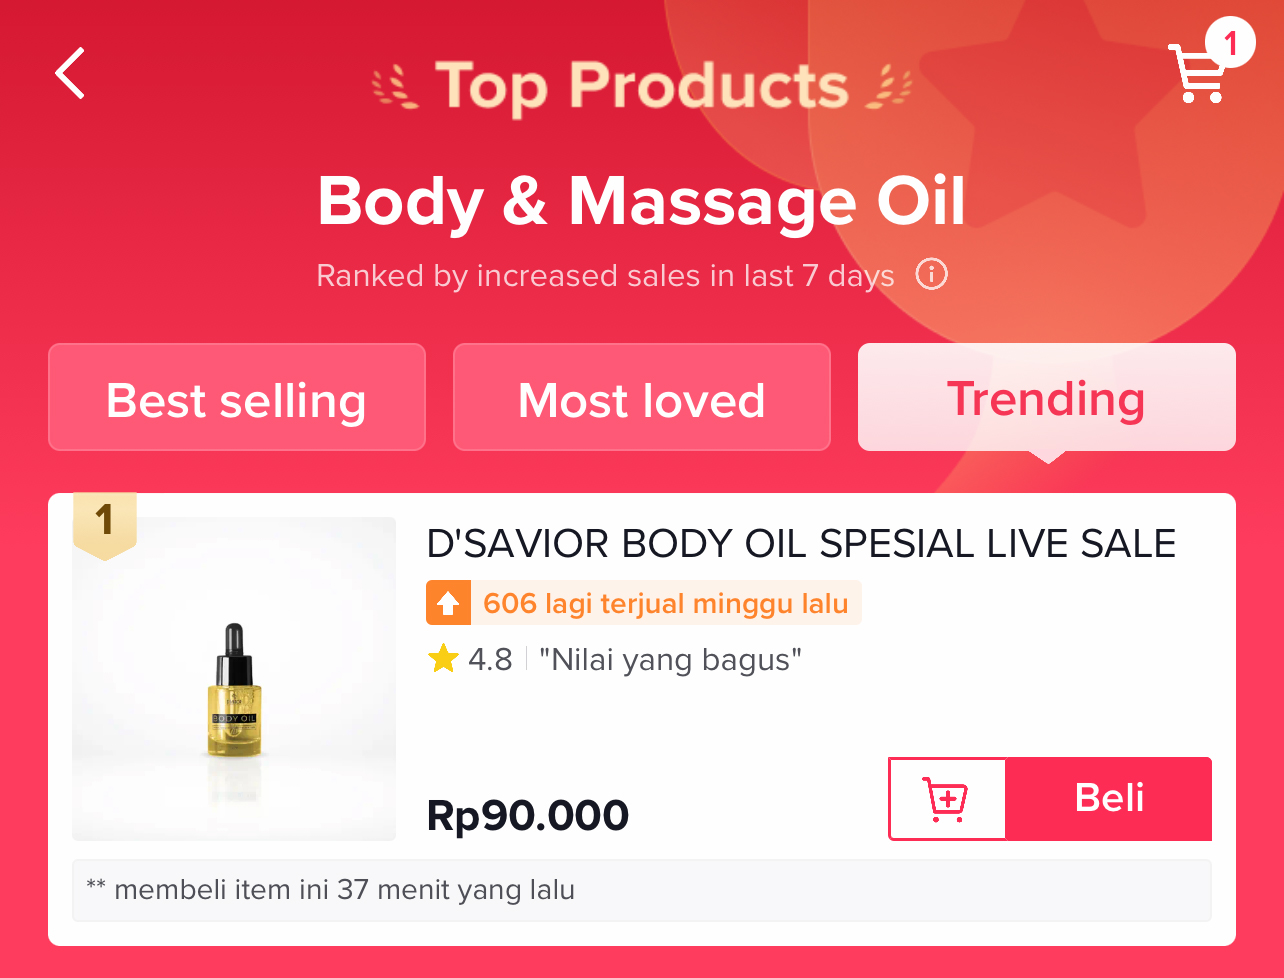 body oil most loved